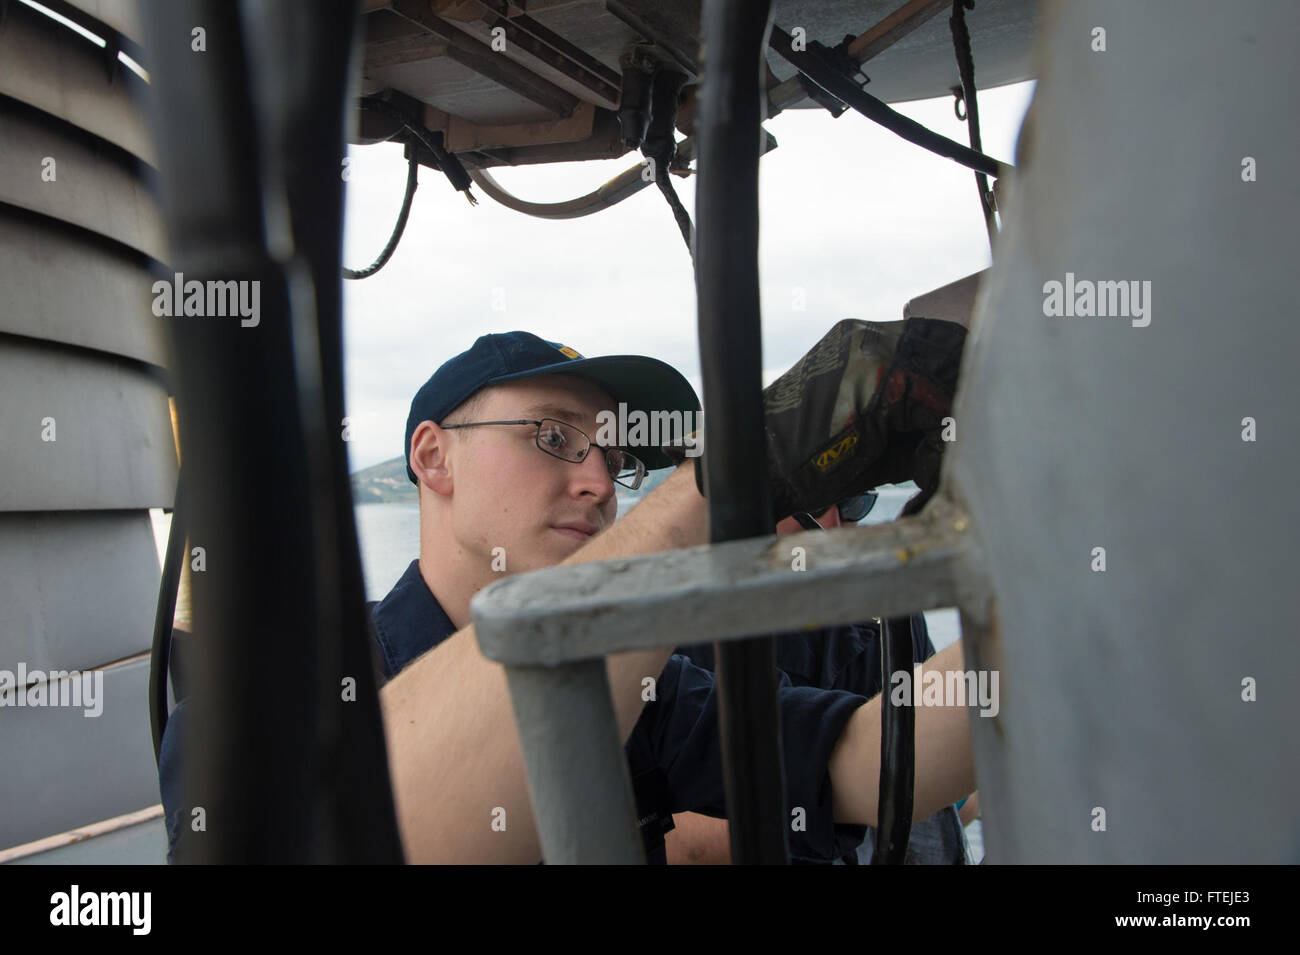 SOUDA BAY, Greece (Nov. 26, 2014) – Fire Controlman 3rd Class Landrel Hankins, from Mountain View, Arkansas, conducts preservation work on combat systems equipment aboard USS Cole (DDG 67) during a voyage-maintenance availability in Souda Bay, Greece, Nov. 26. Cole, an Arleigh Burke-class guided-missile destroyer, homeported in Norfolk, is conducting naval operations in the U.S. 6th Fleet area of operations in support of U.S. national security interests in Europe. Stock Photo